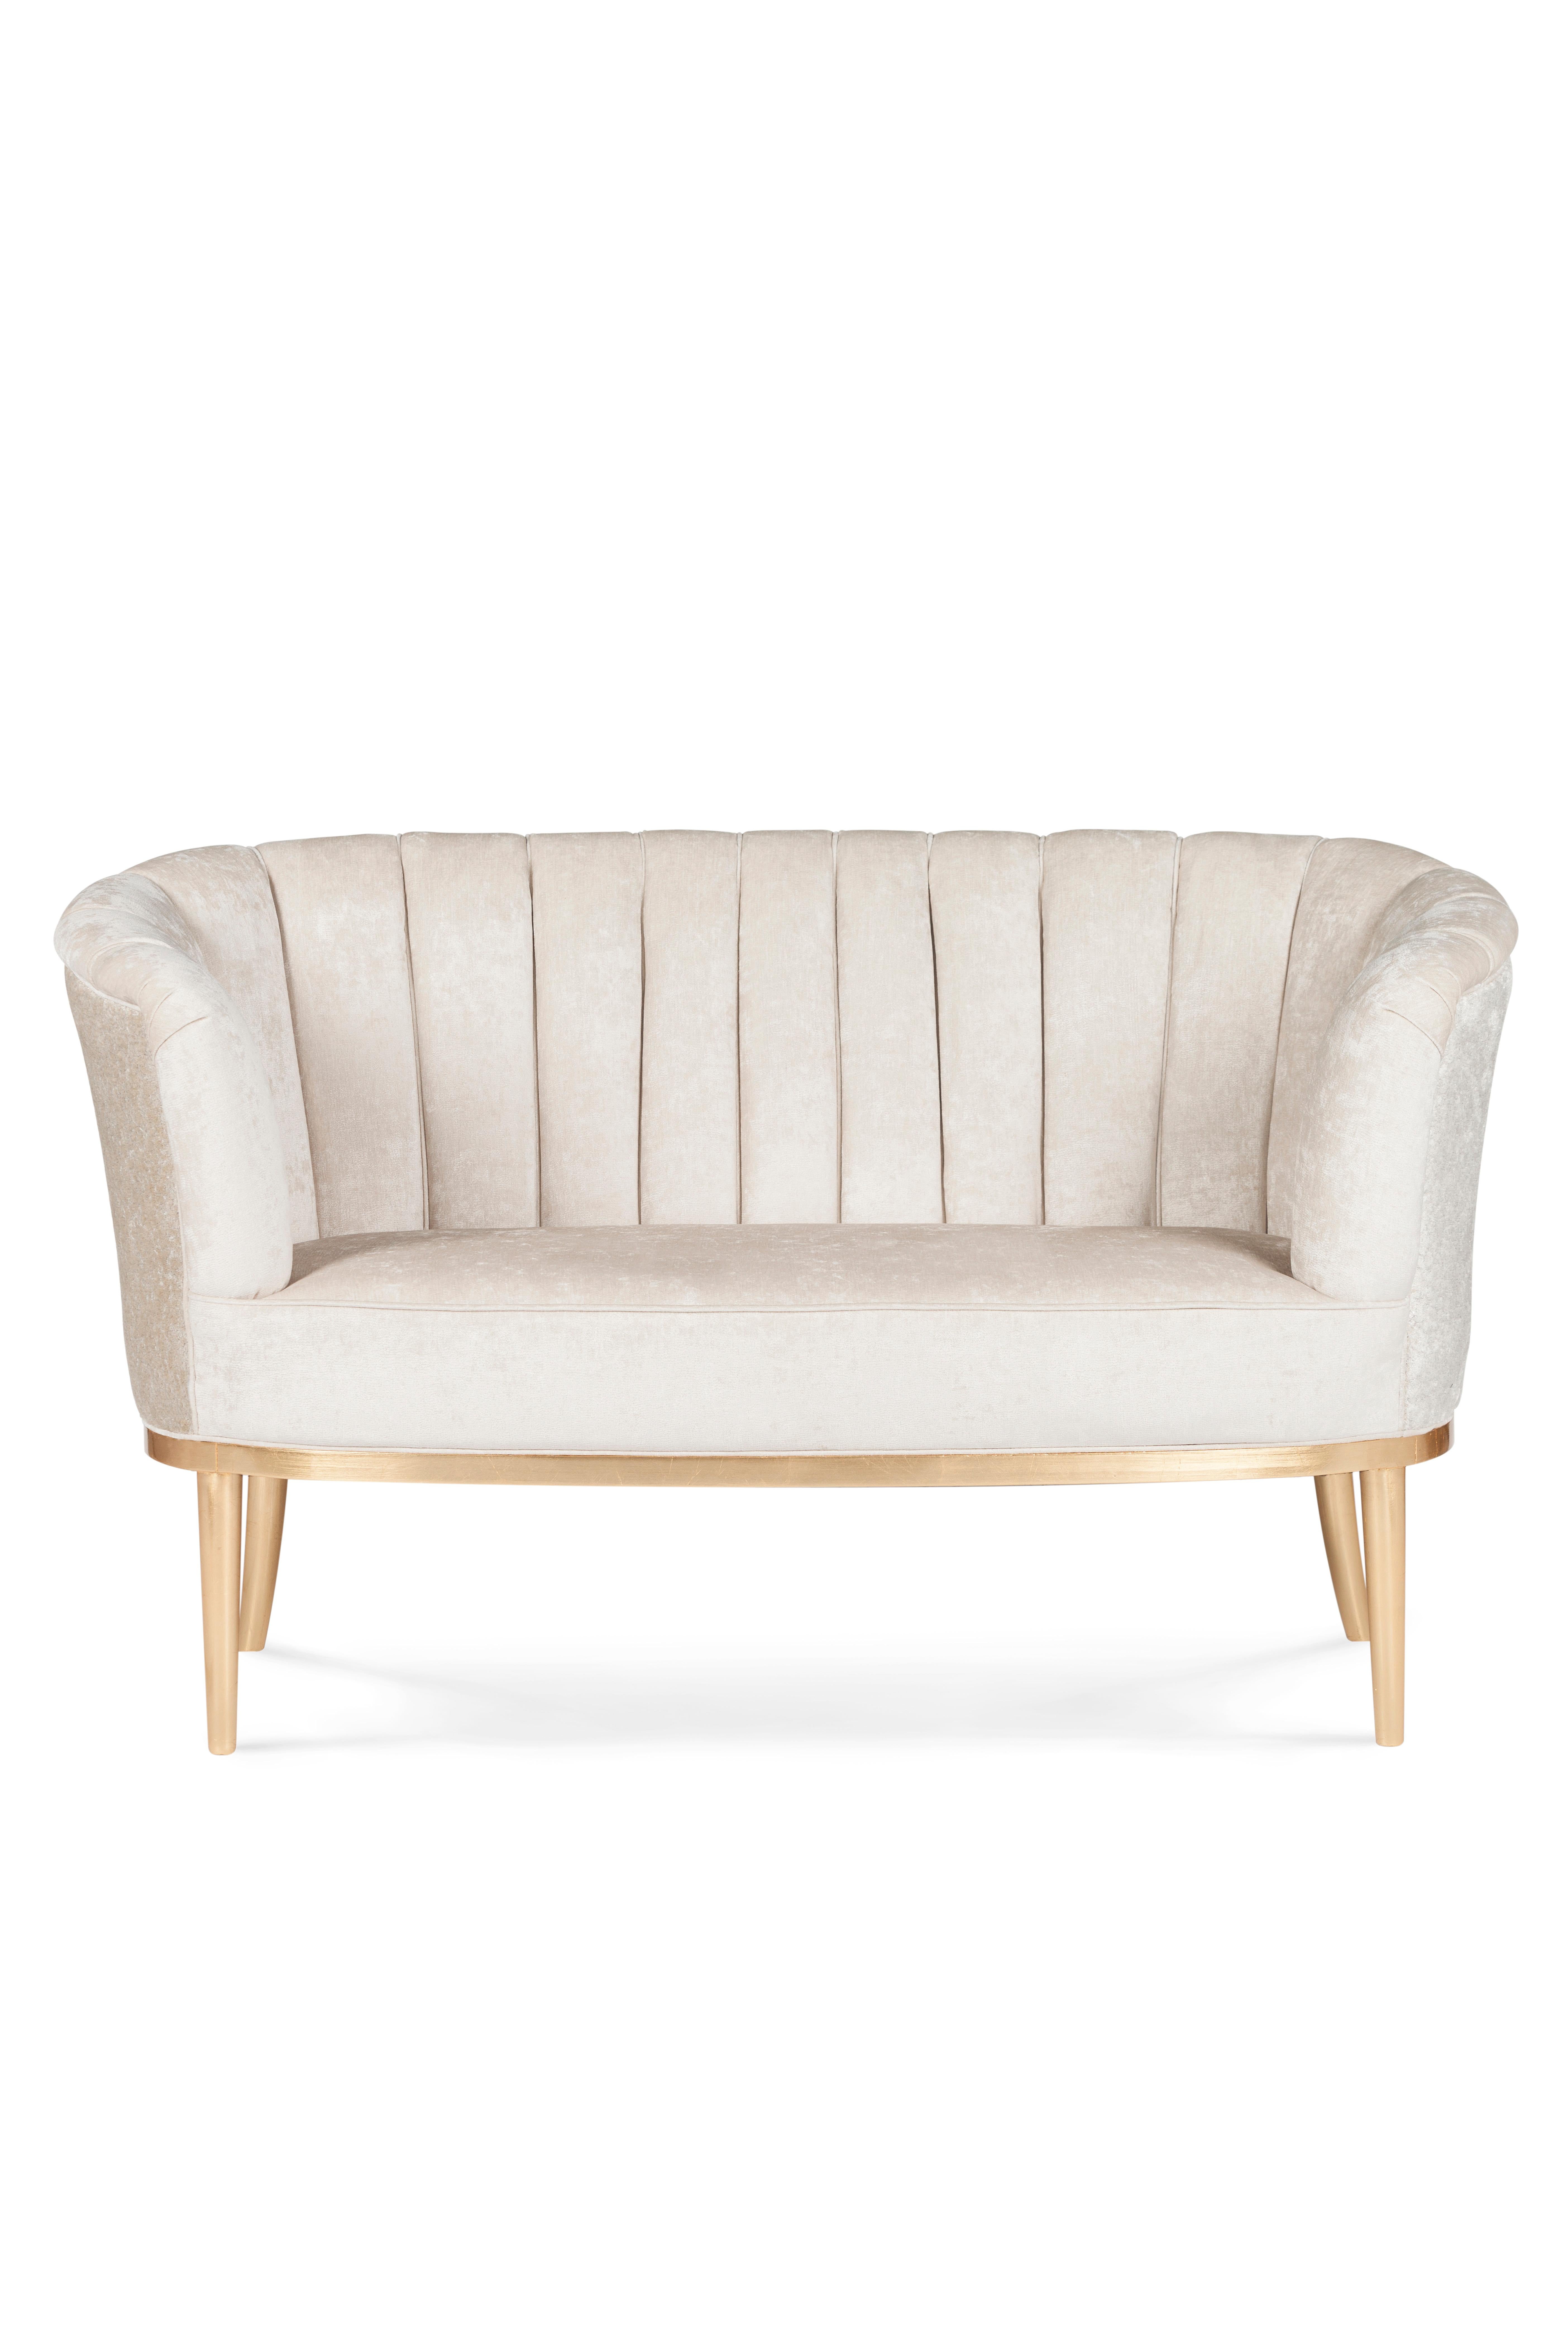 Lisboa sofa, Modern Collection, Handcrafted in Portugal - Europe by GF Modern.

The Lisboa sofa adds a sophisticated and elegant touch to any living area. The sofa is upholstered in beige velvet and it exudes luxury and perfection. The oval base,